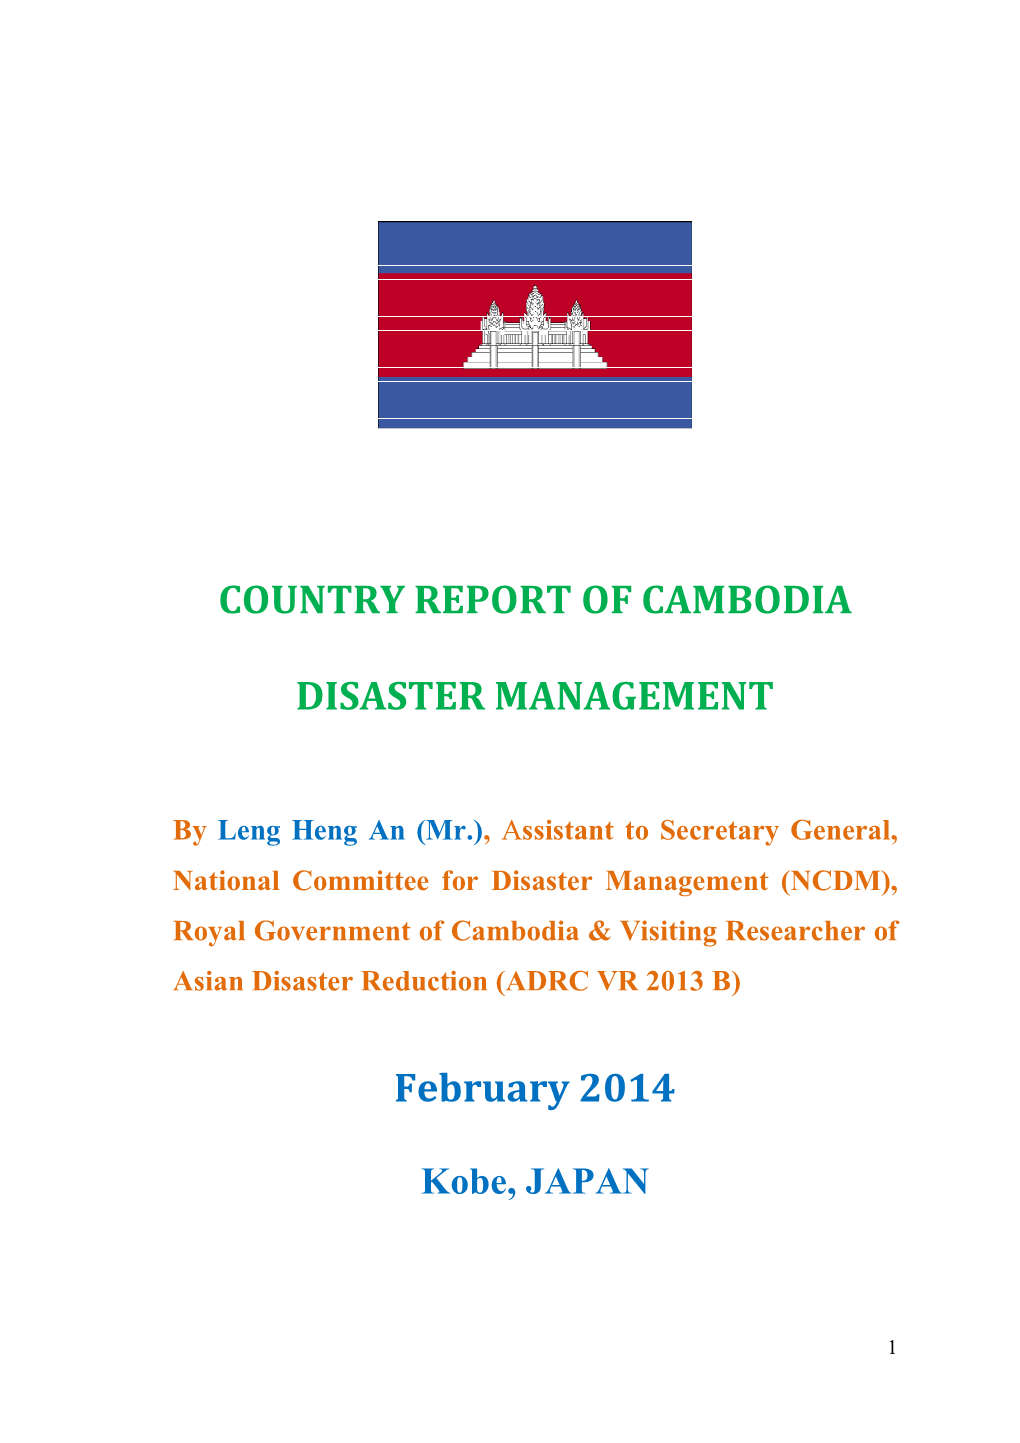 Country Report of Cambodia Disaster Management